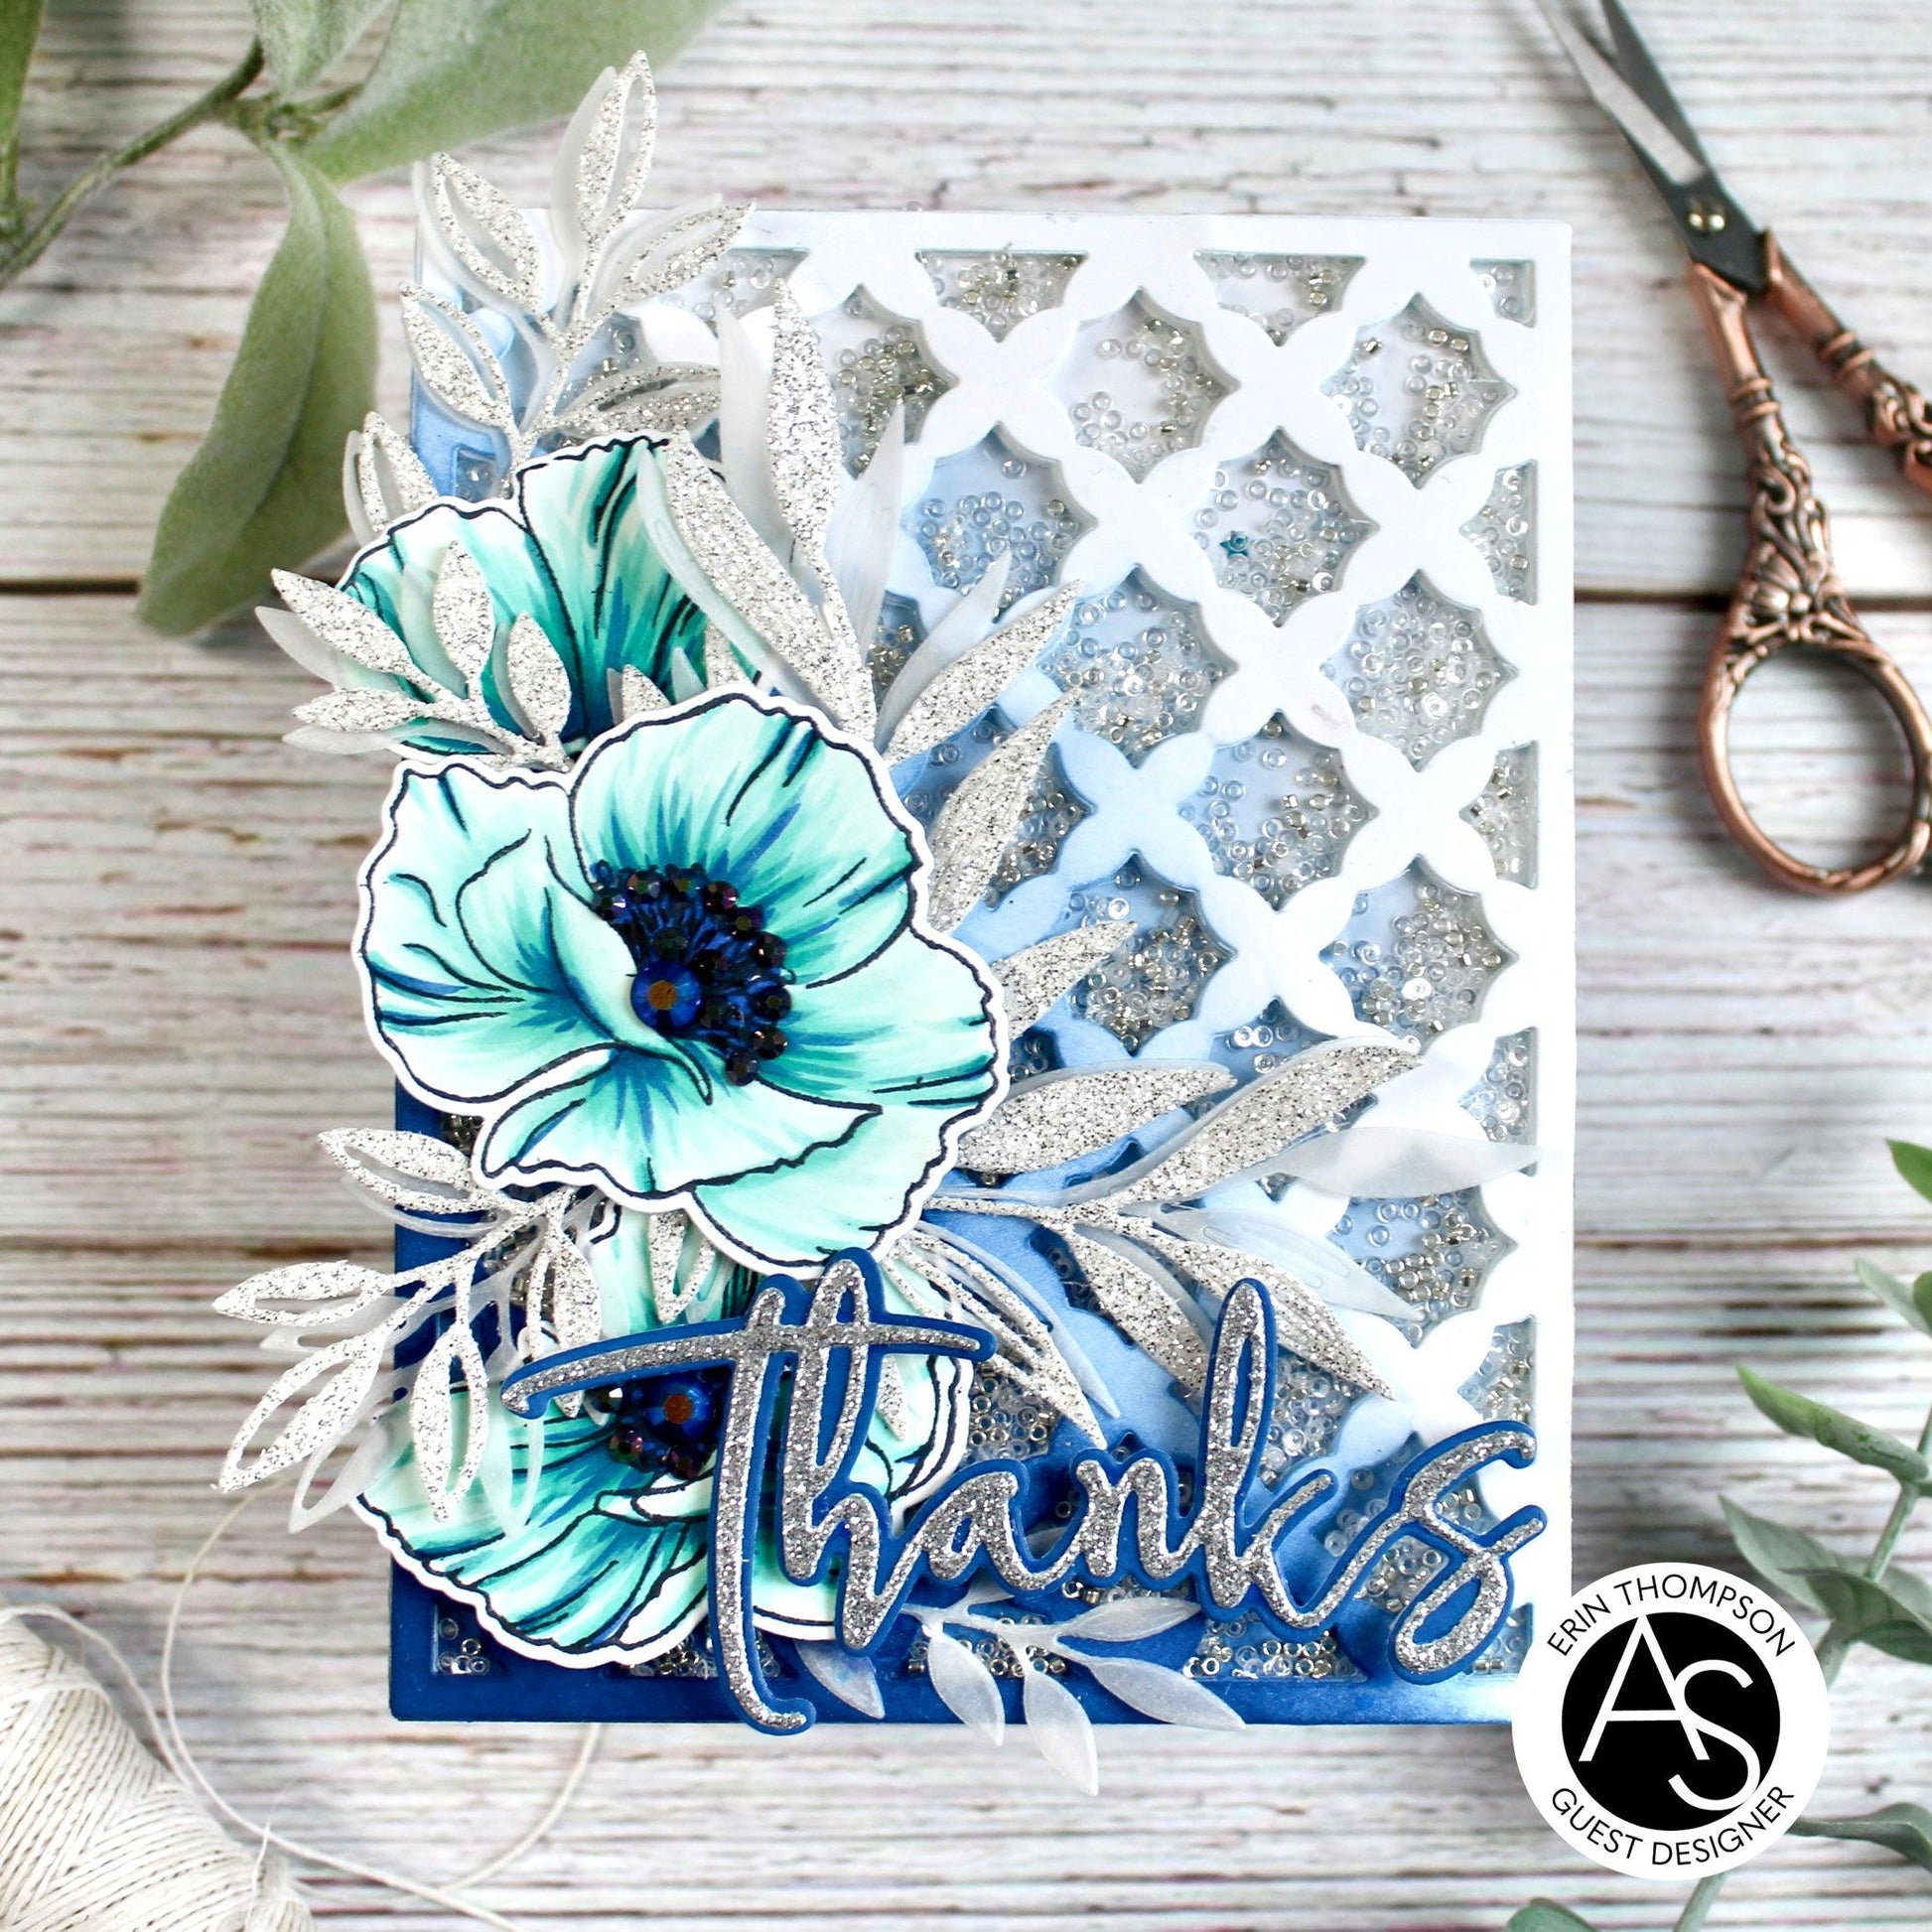 Floral-Lattice-Cover-Die-alex-syberia-designs-cardmaking-stamps-hotfoils-tutoral-new-release-february-handmadecards-poppies-shaker-cards